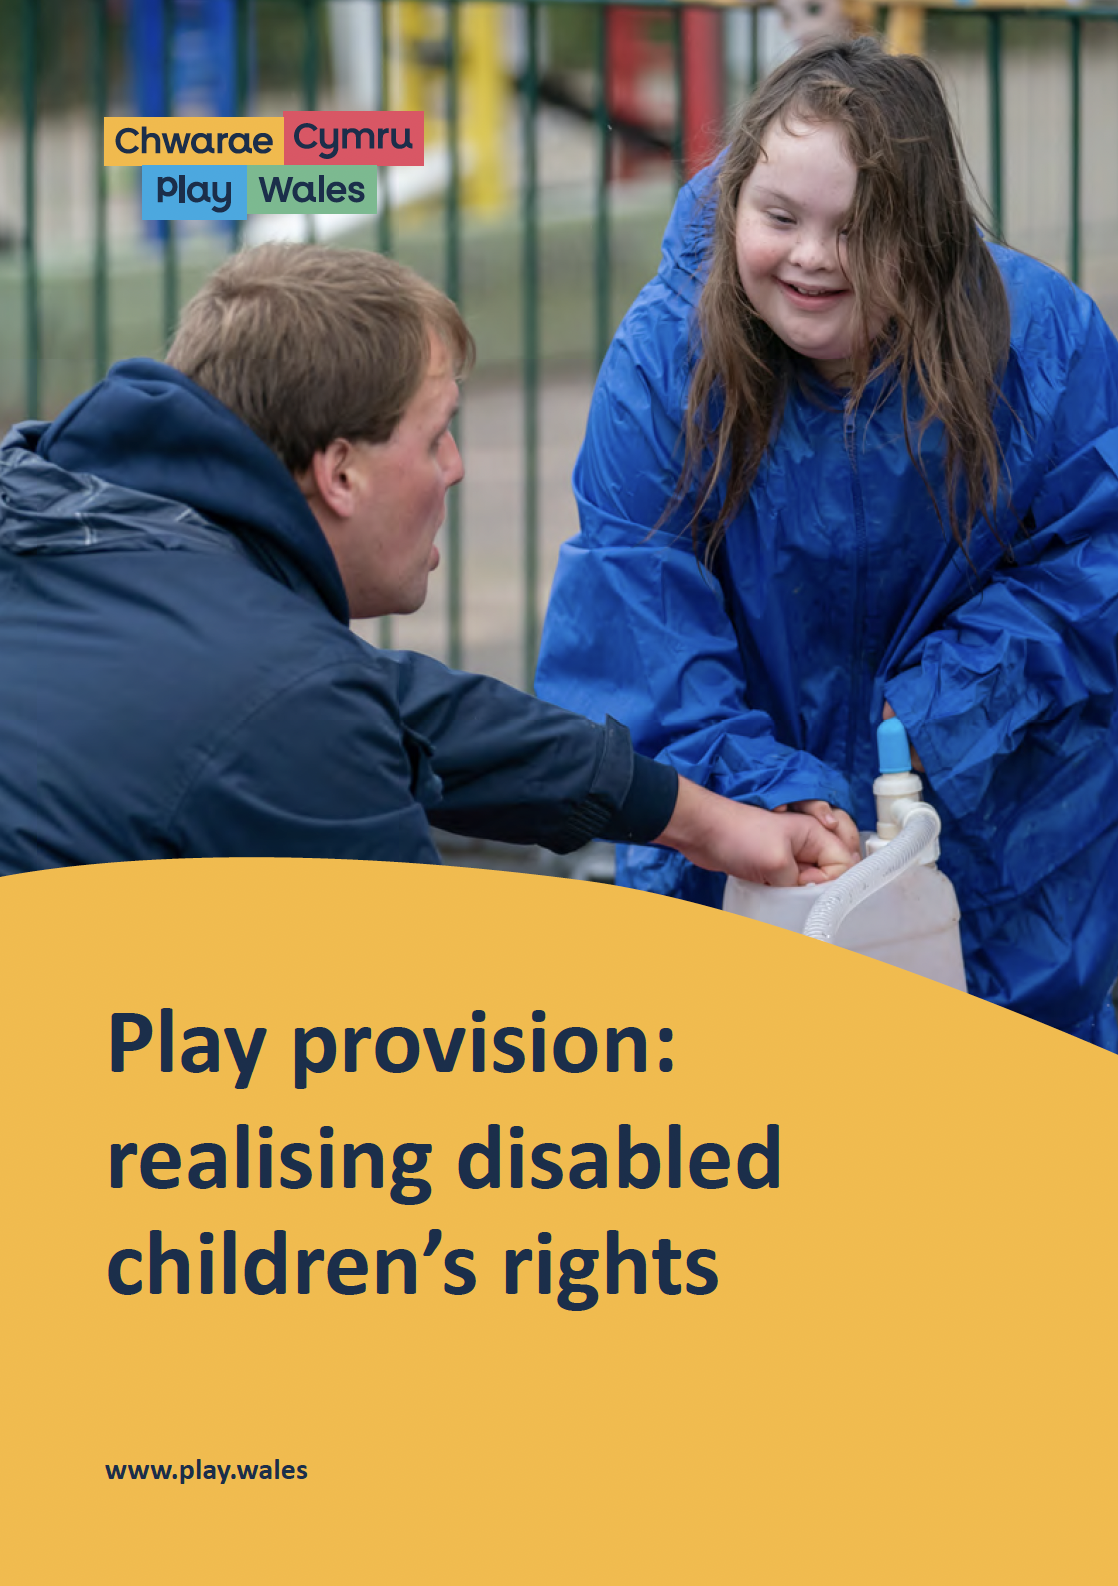 Play provision: realising disabled children’s rights